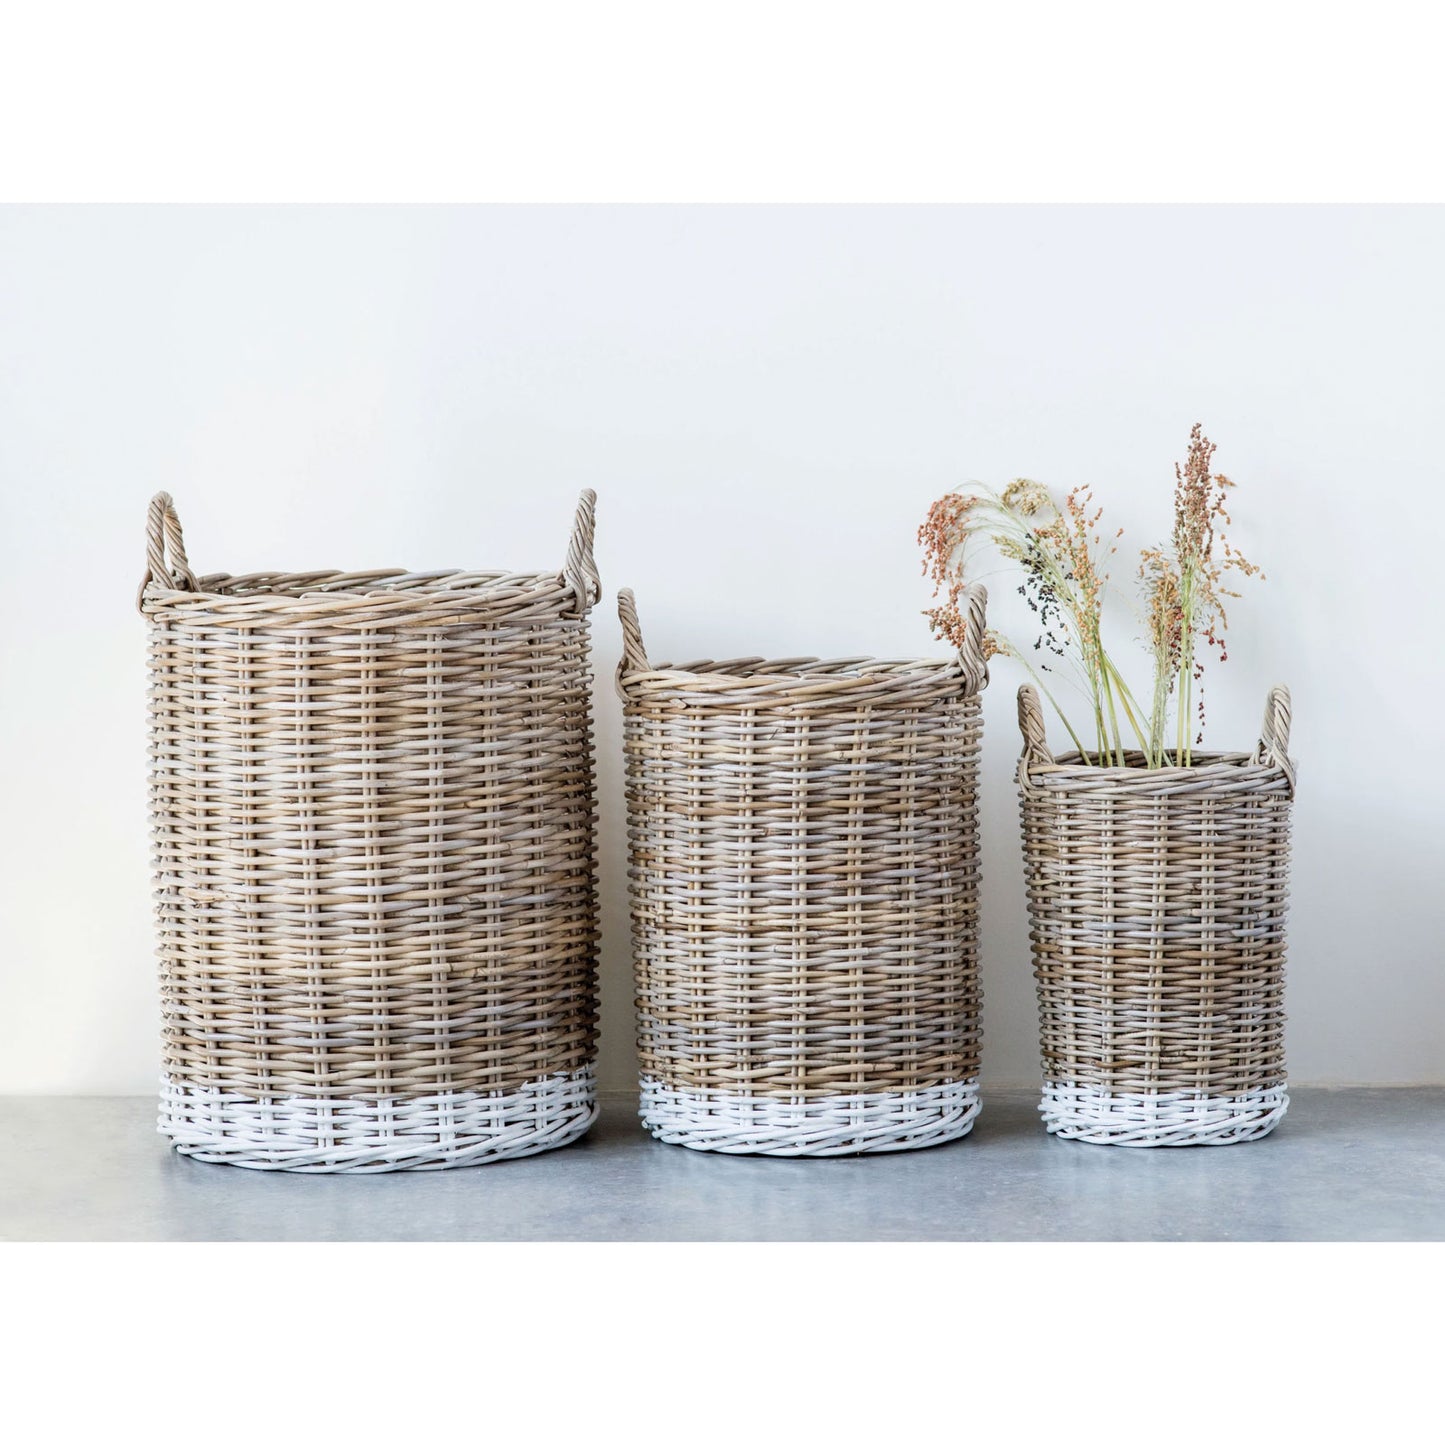 Rattan Baskets with Handles, Set of 3 (Pick Up / Local Delivery Only)